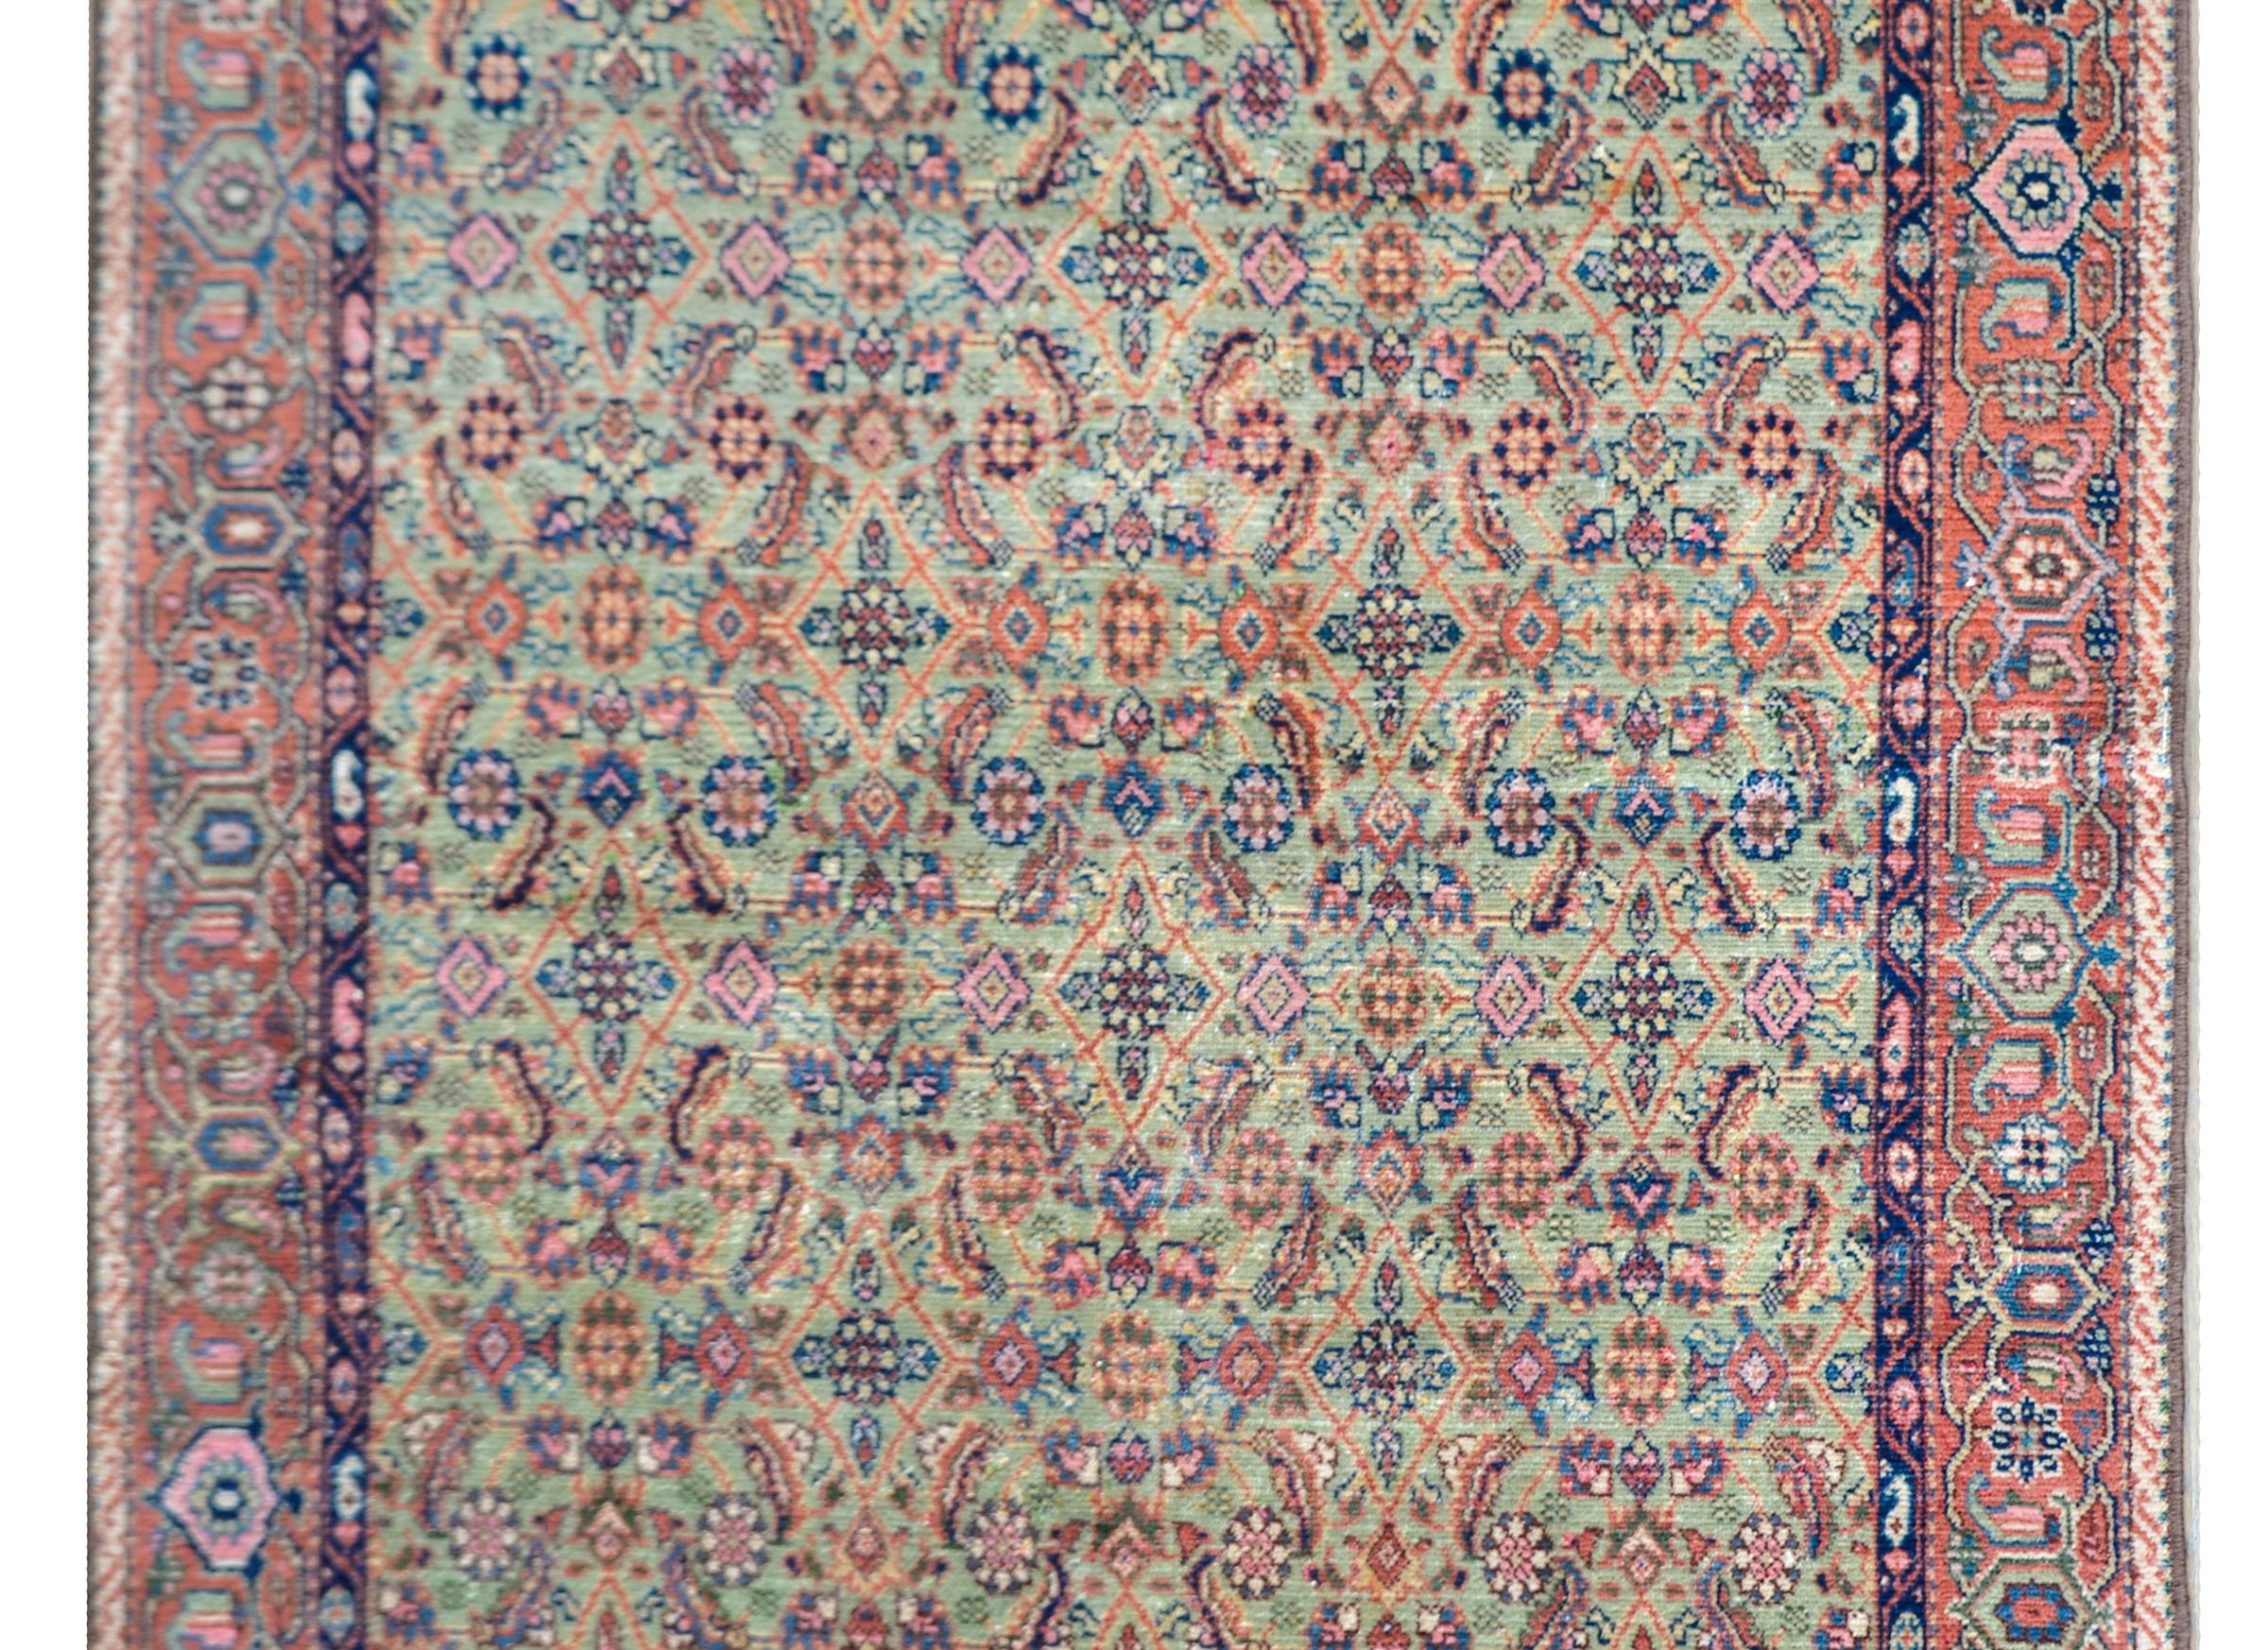 A beautiful early 20th century Persian Sultanabad rug with an all-over trellis floral and leaf pattern woven in orange, gold, pink, and indigo, against a pale green background, and surrounded by a simple border with a stylized floral pattern.